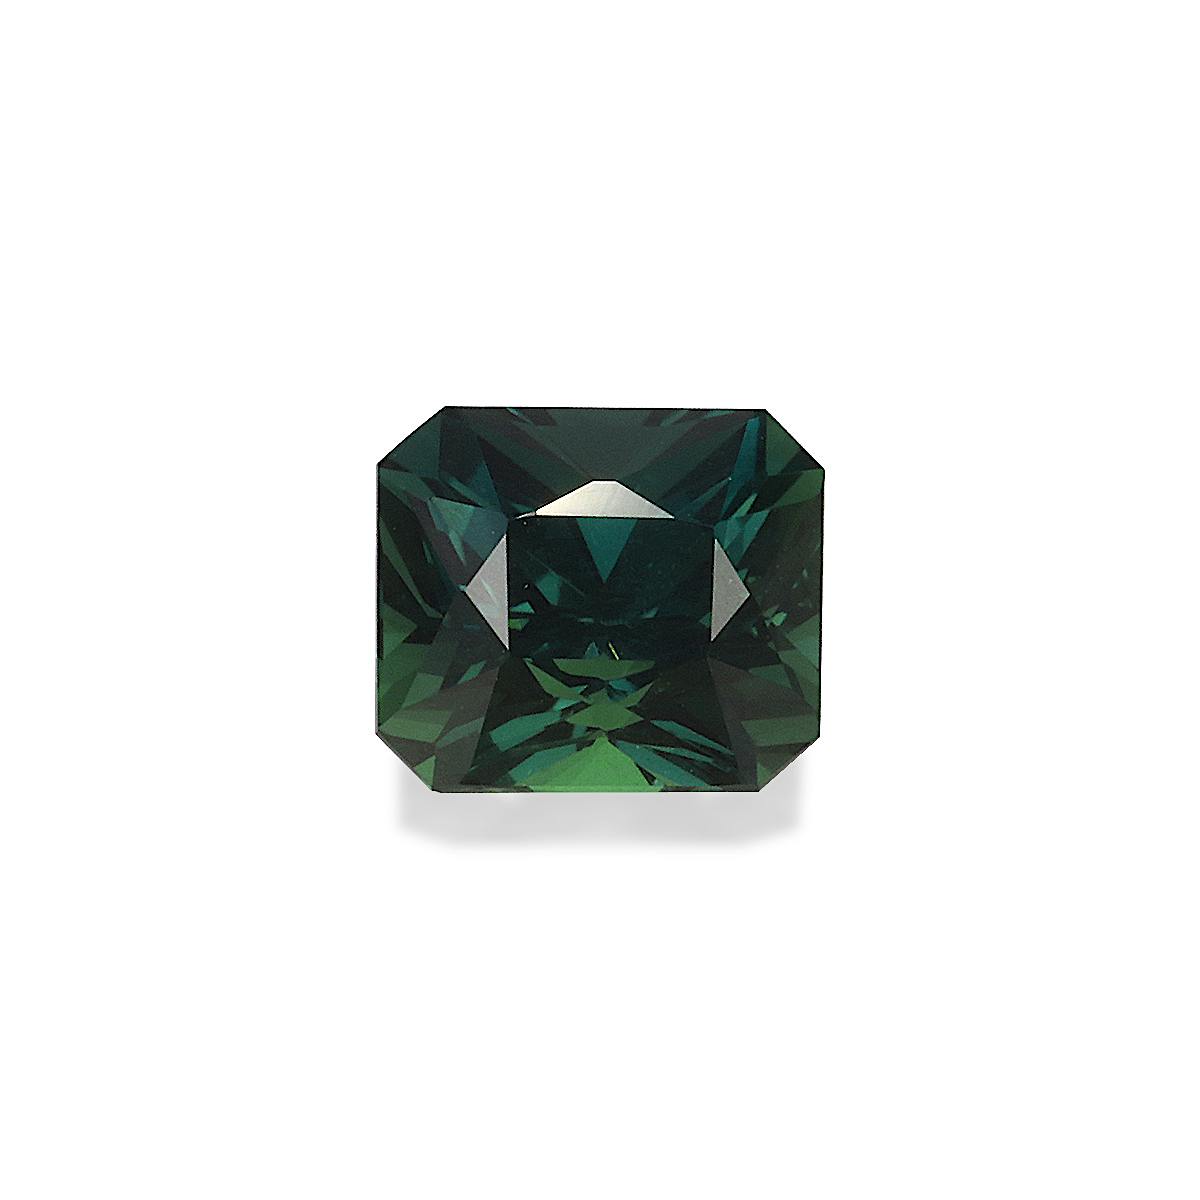 Green Teal Sapphire 1.25ct (TL0069)